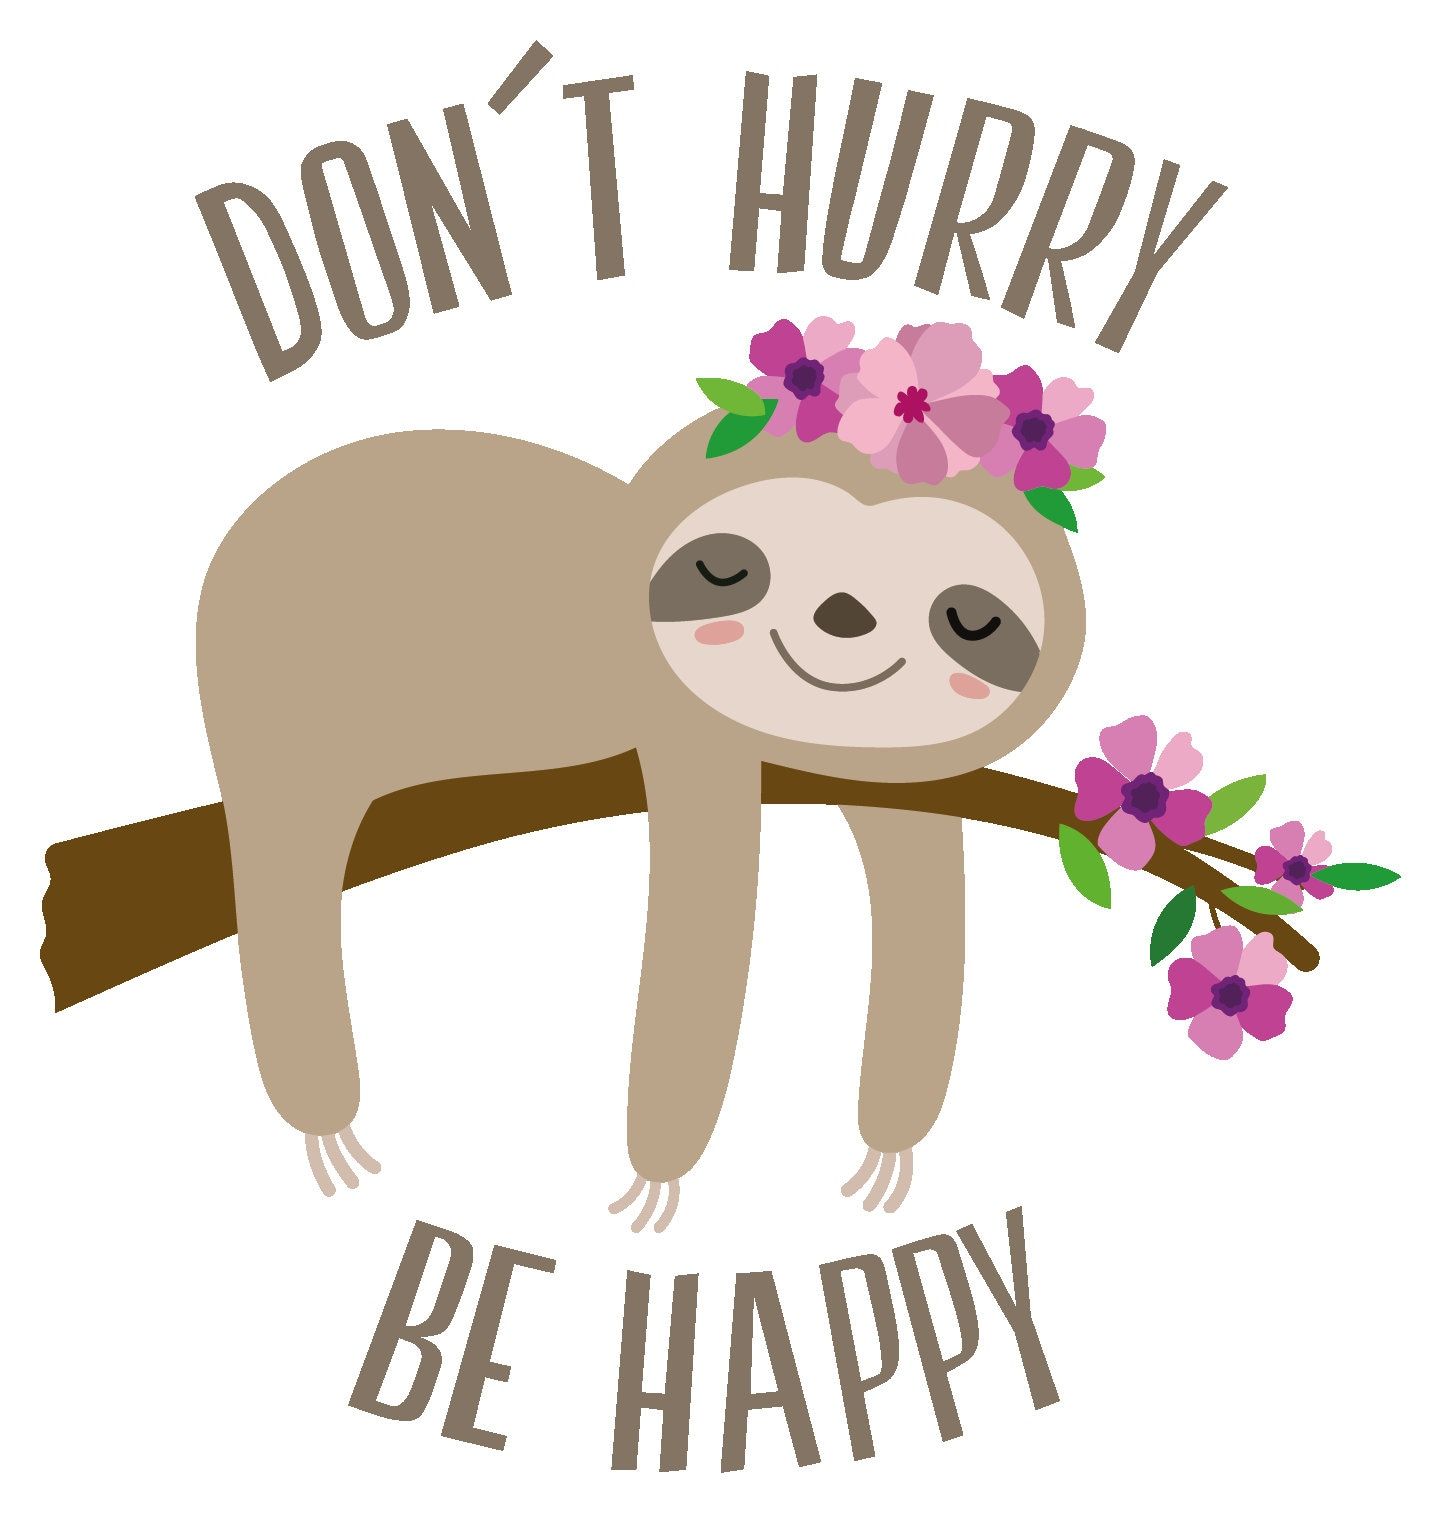 A sloth hanging from a tree branch with the words 